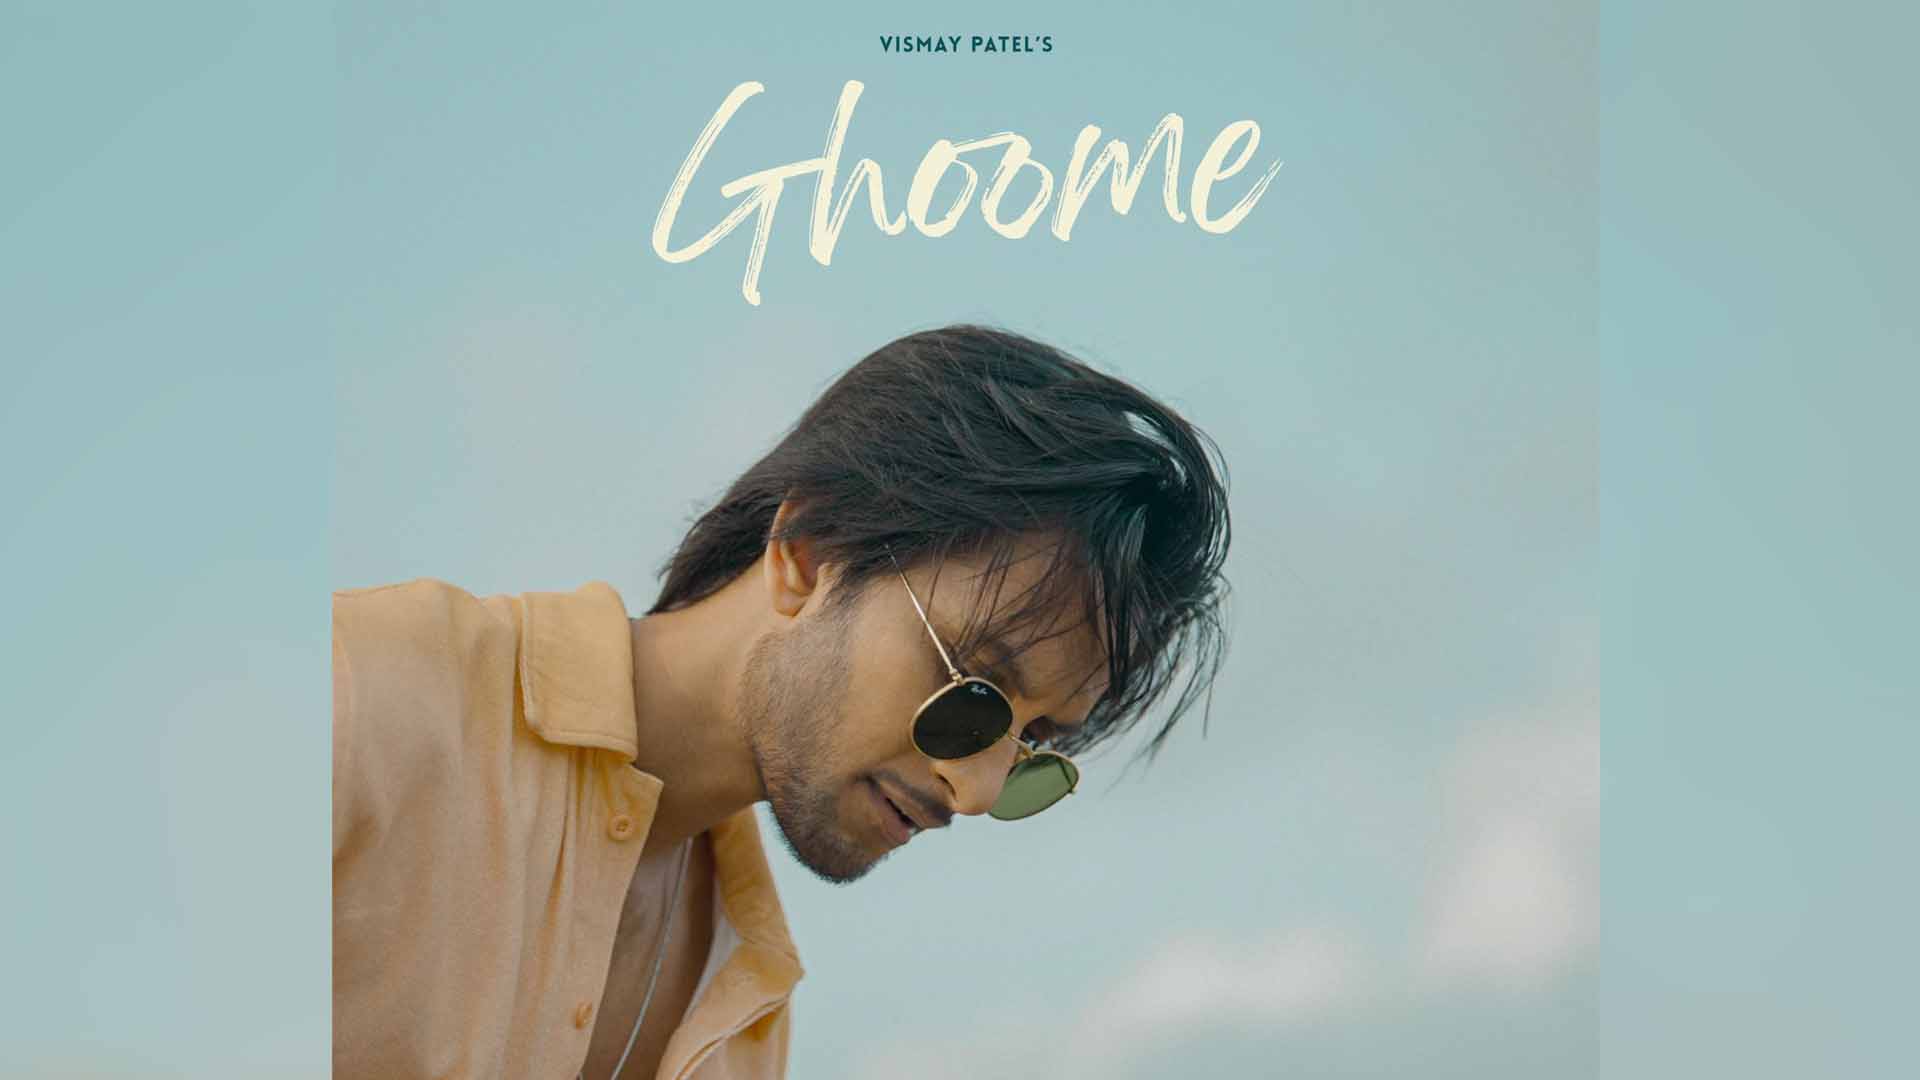 Vismay Patel Unleashes ‘Ghoome’ : A Captivating Pop Song Celebrating Self-Expression and Liberation